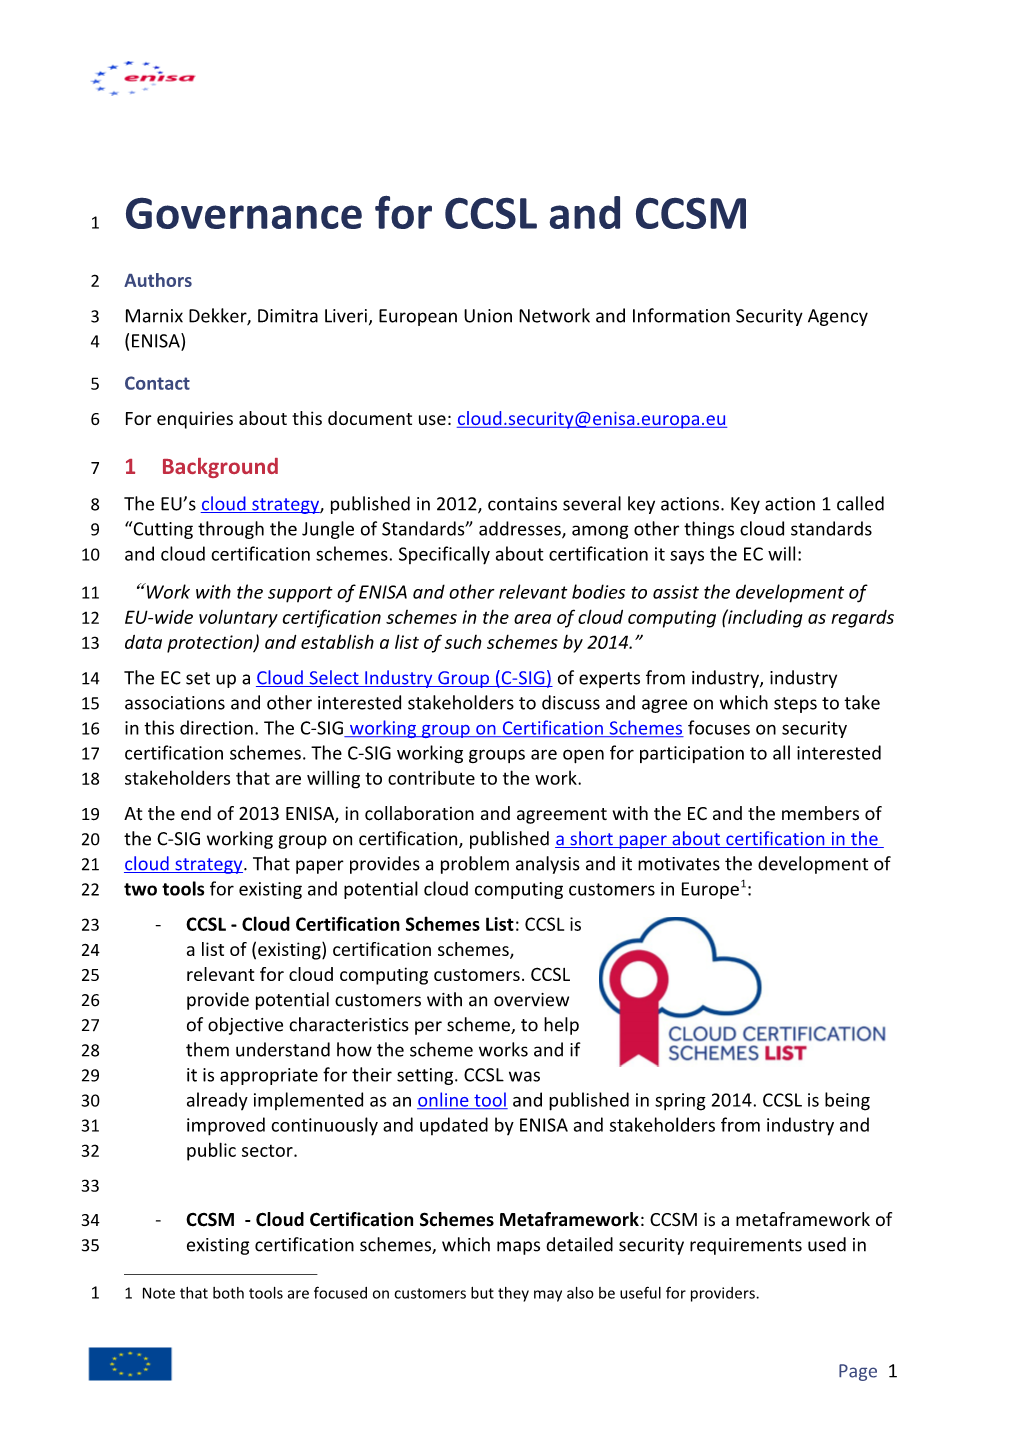 Governance for CCSL and CCSM